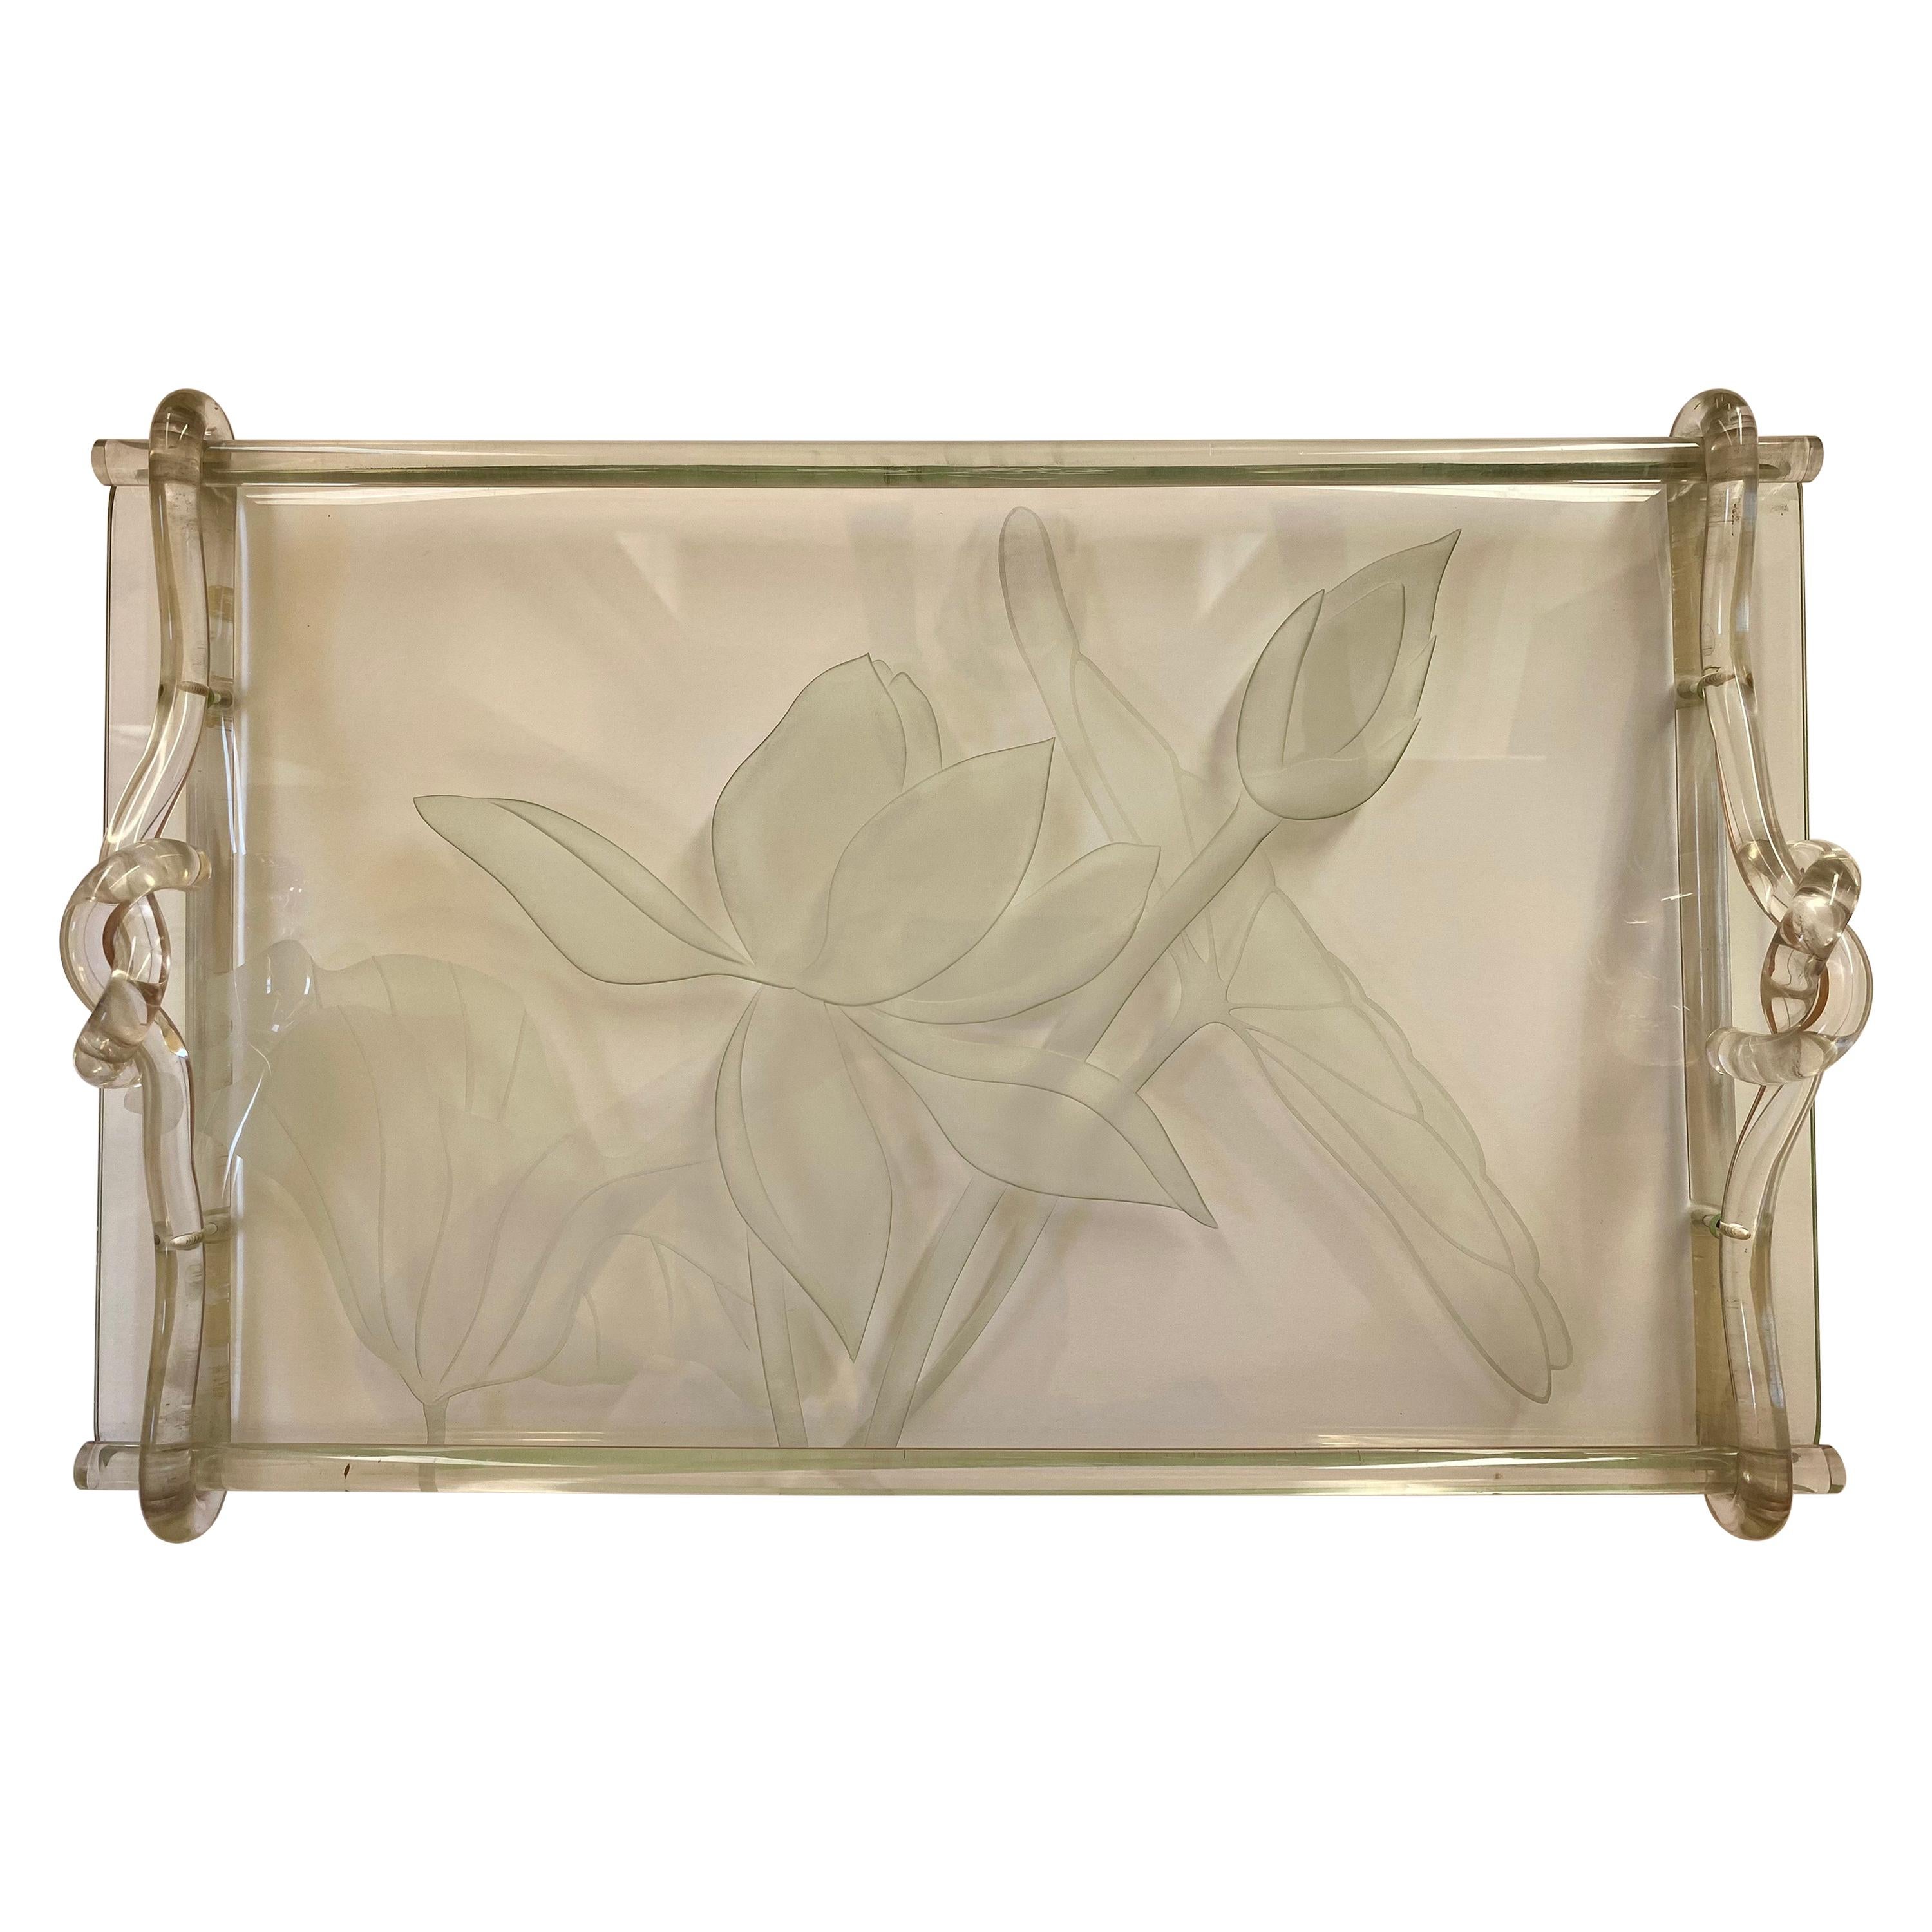 Hollywood Regency Dorothy Thorpe Frosted Glass Lucite Vanity Serving Tray Signed